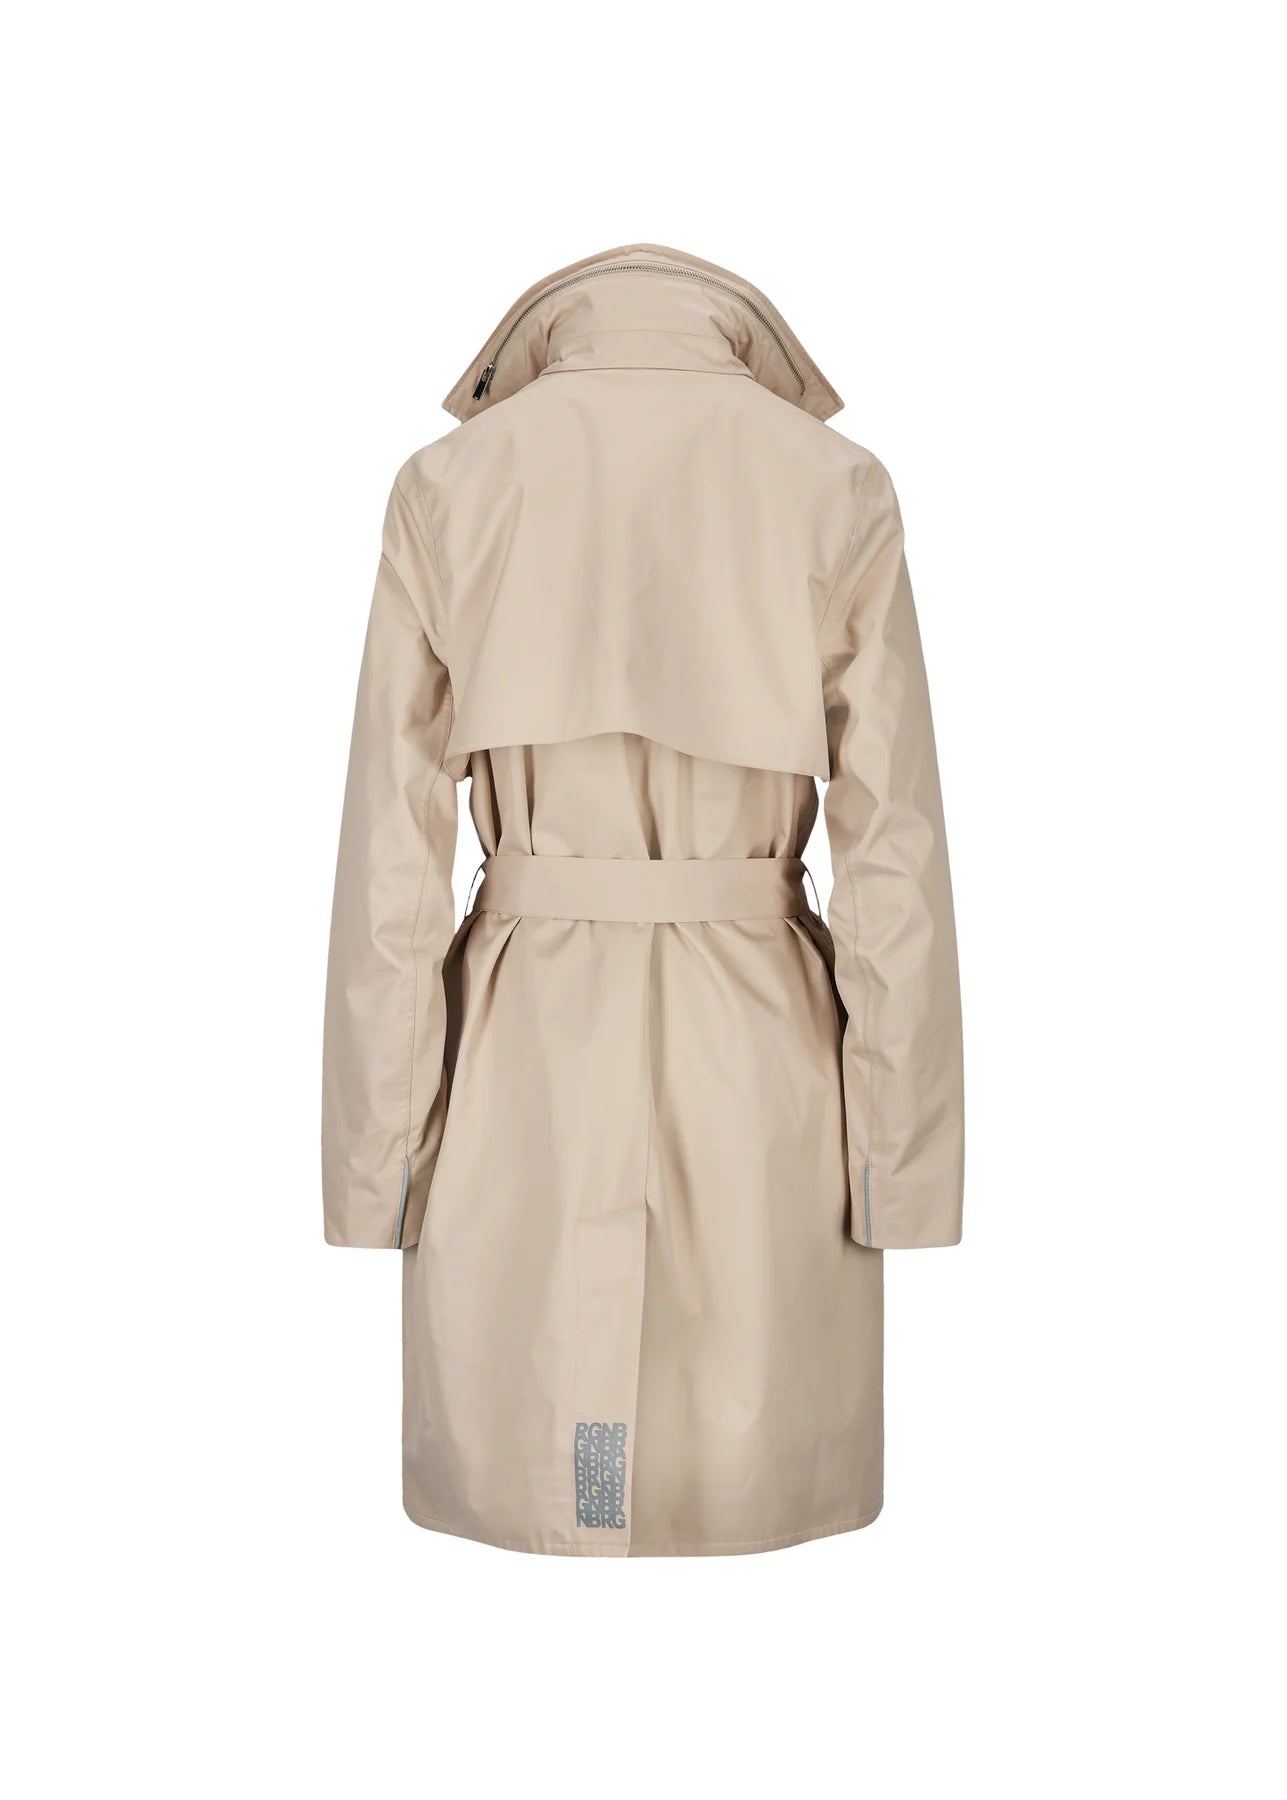 Beige raincoat with tie waist magnetic fastenings and large notch lapel with classic collar